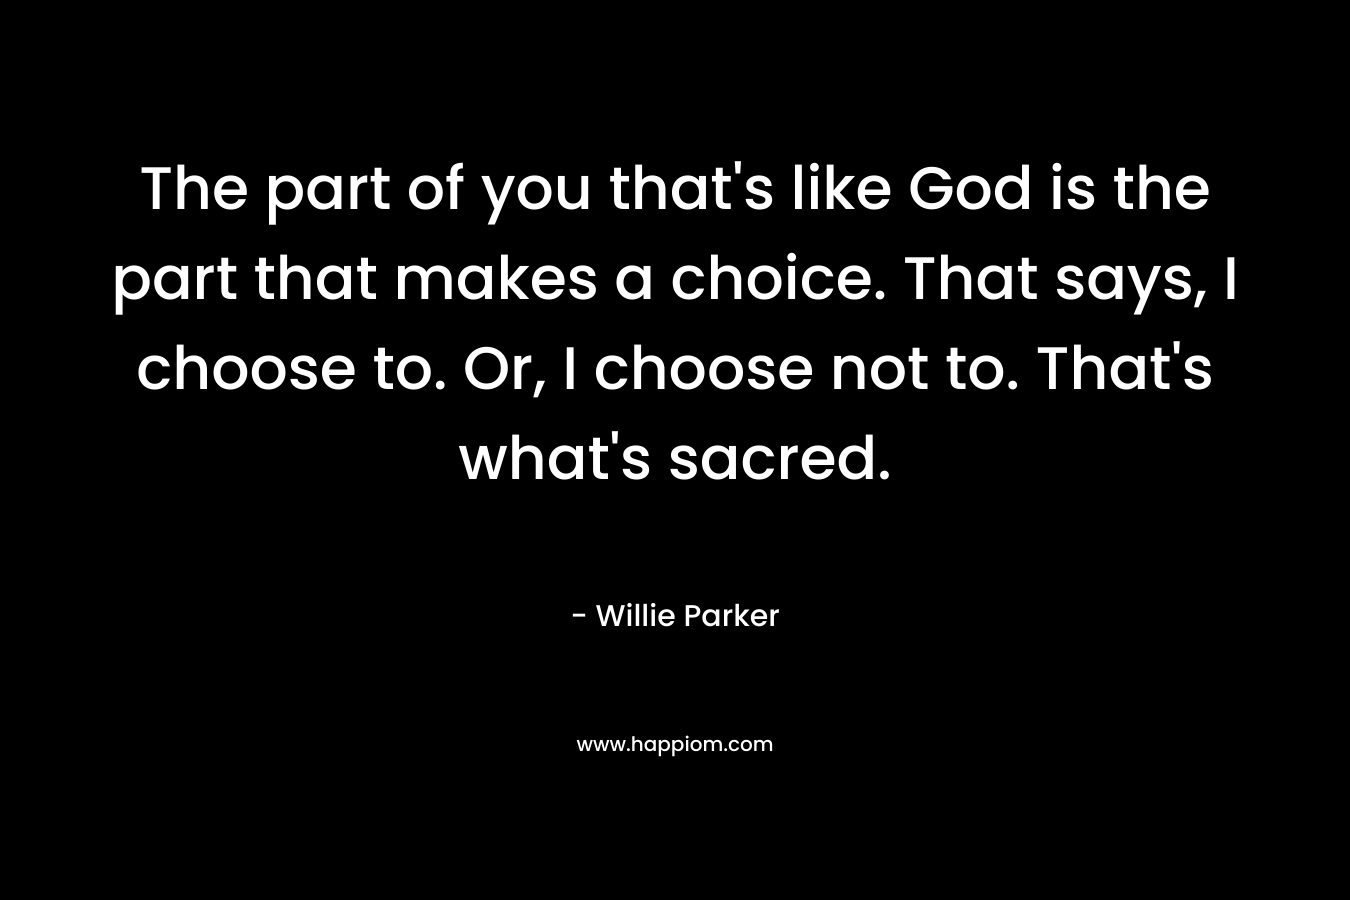 The part of you that's like God is the part that makes a choice. That says, I choose to. Or, I choose not to. That's what's sacred.